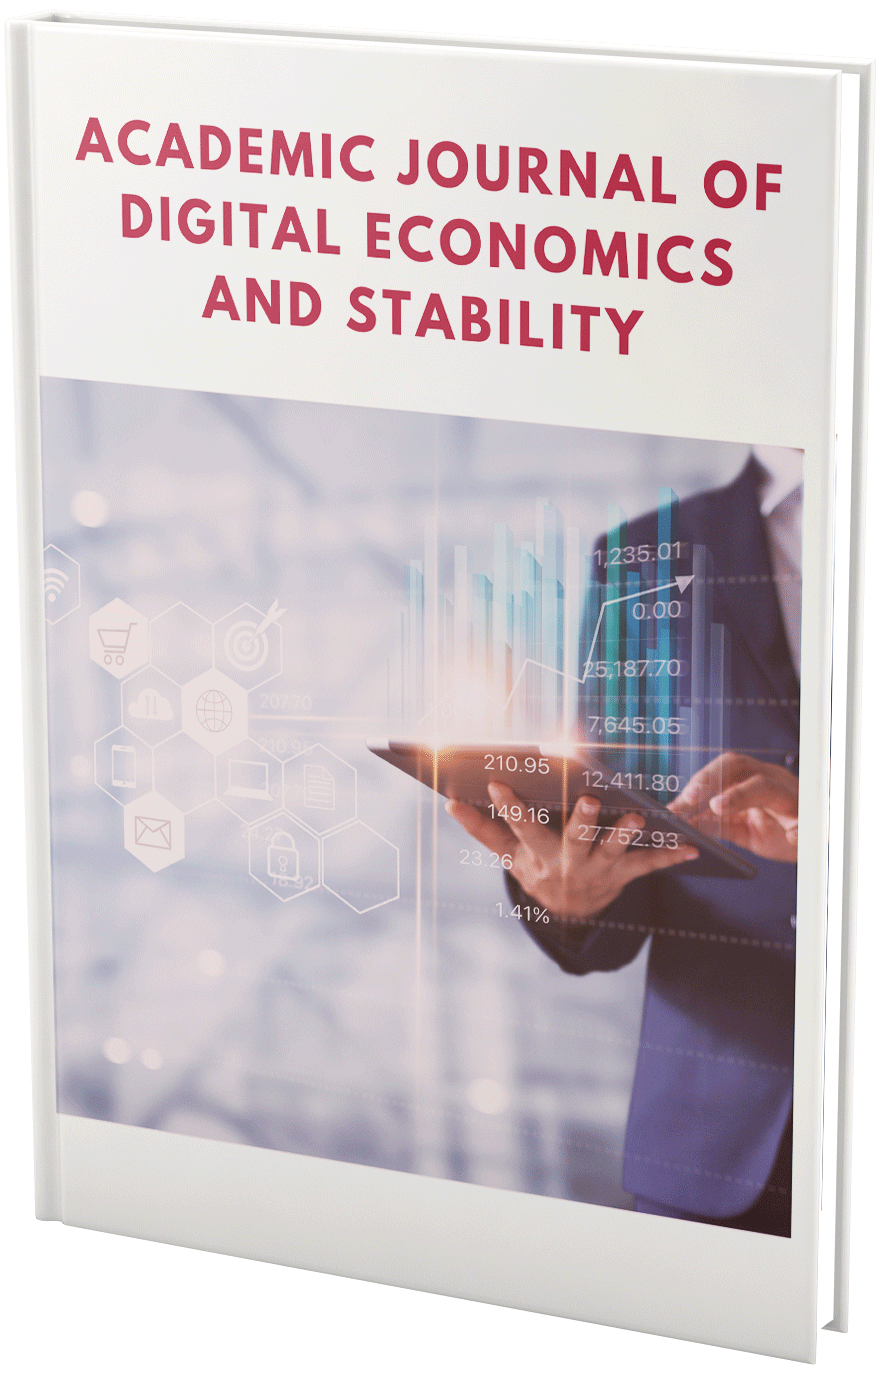 					View Vol. 2 (2021): Academic Journal of Digital Economics and Stability
				